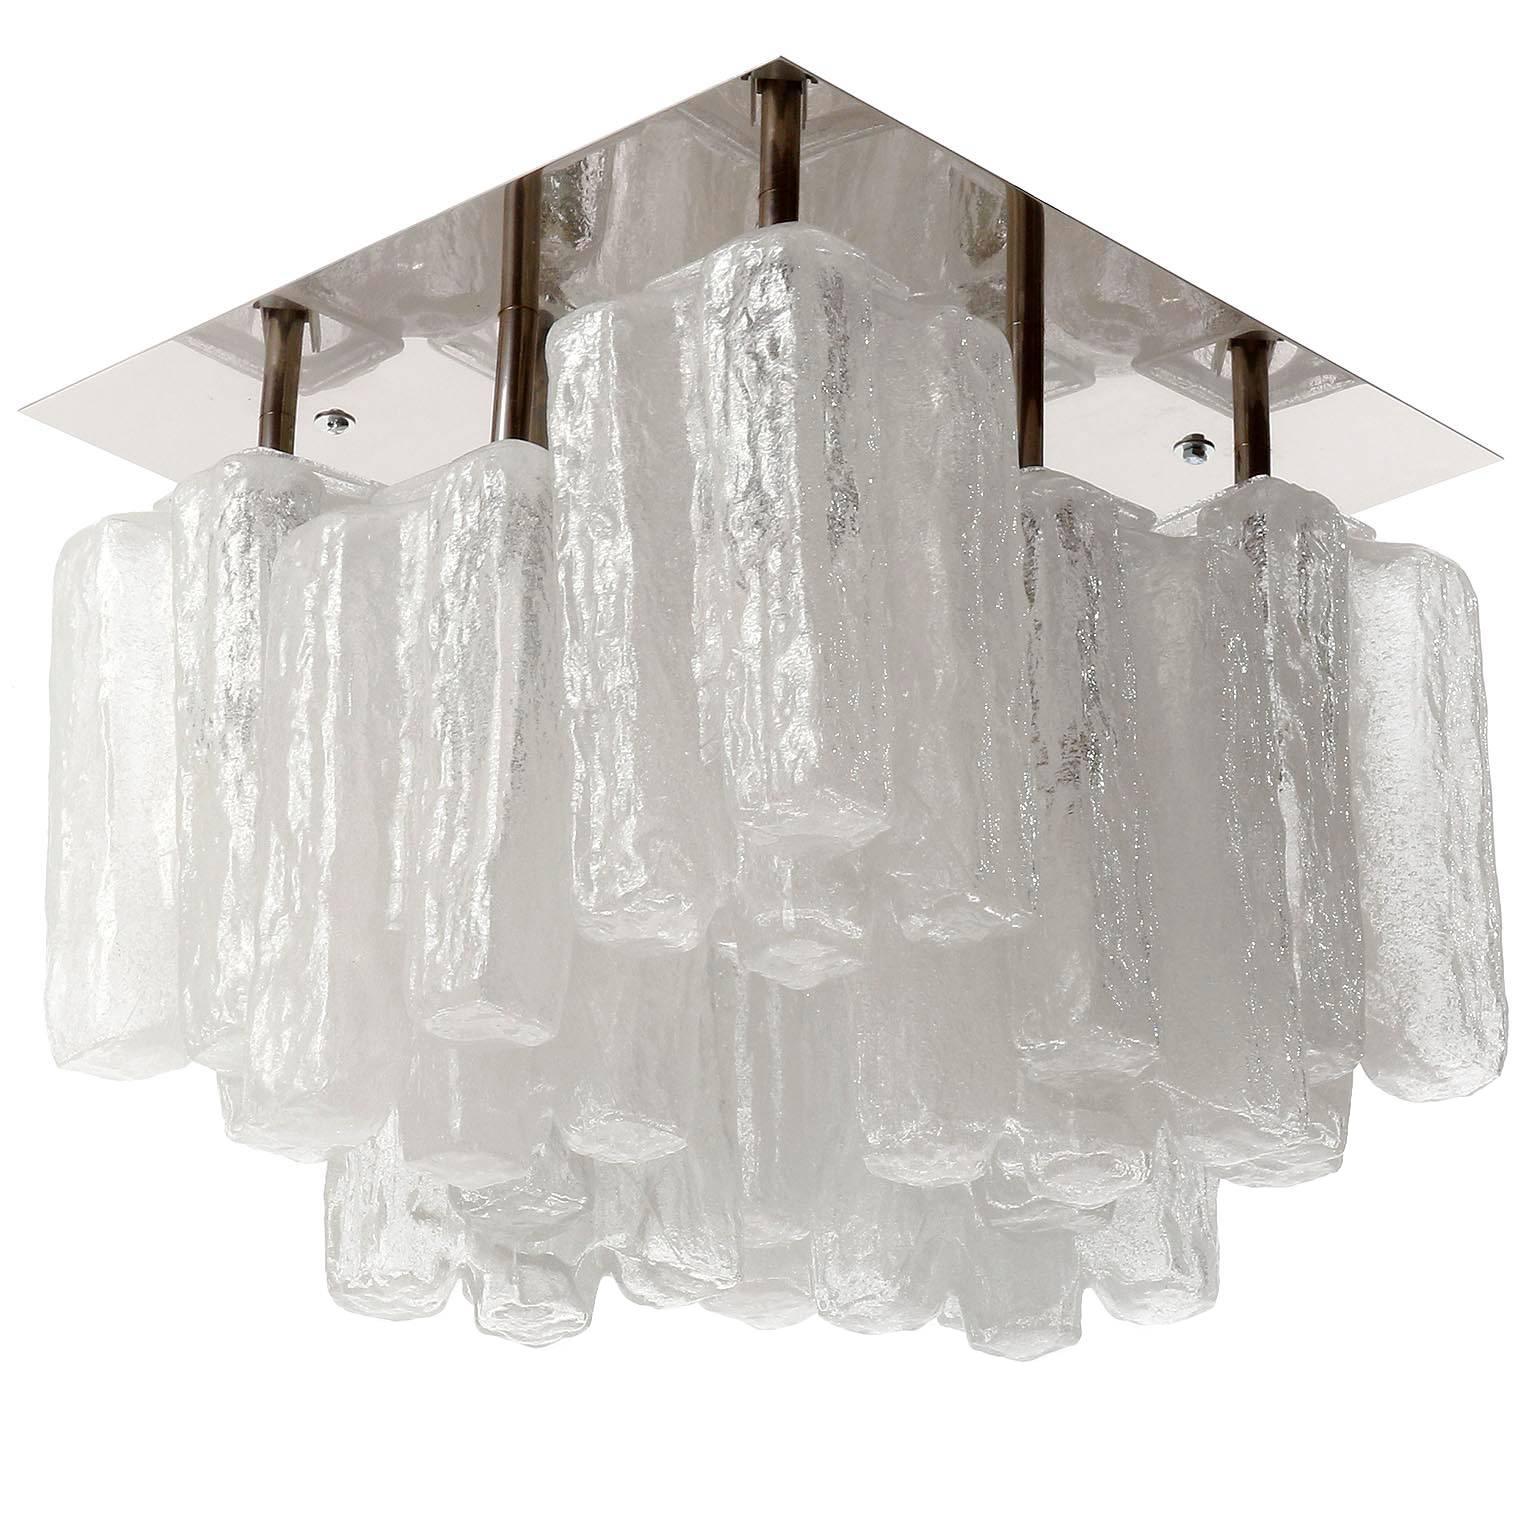 One of eight square light fixtures by Kalmar, Austria, manufactured in midcentury, circa 1970 (late 1960s or early 1970s). 
Each fixture has eight sockets for small screw base bulbs E14 (e.g. LED or filament, max. 40 W per bulb) which are covered